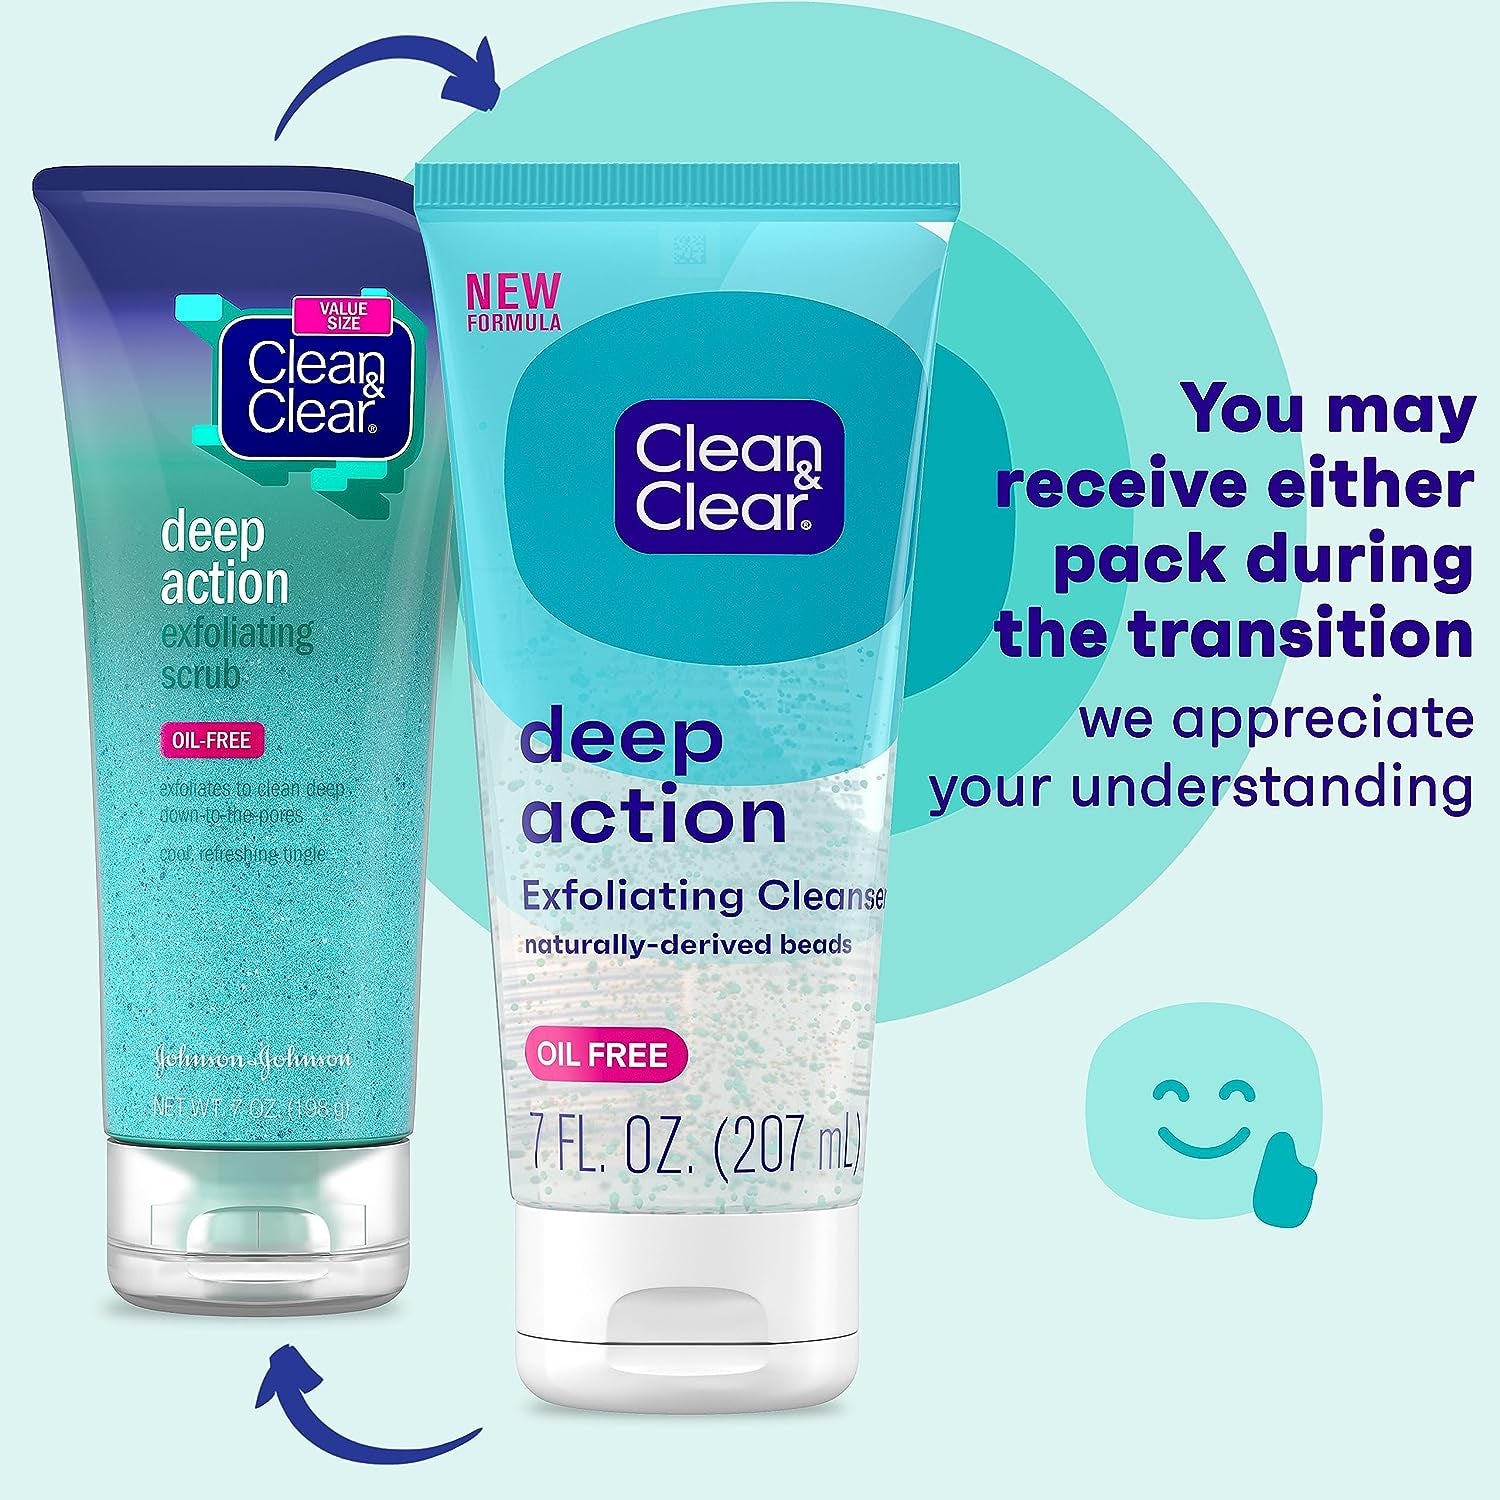 Clean & Clear Oil-Free Deep Action Exfoliating Facial Scrub, Cooling Daily Face Wash with Exfoliating Beads for Smooth Skin, Cleanses Deep down to the Pores to Remove Dirt, Oil & Makeup, 7 Oz